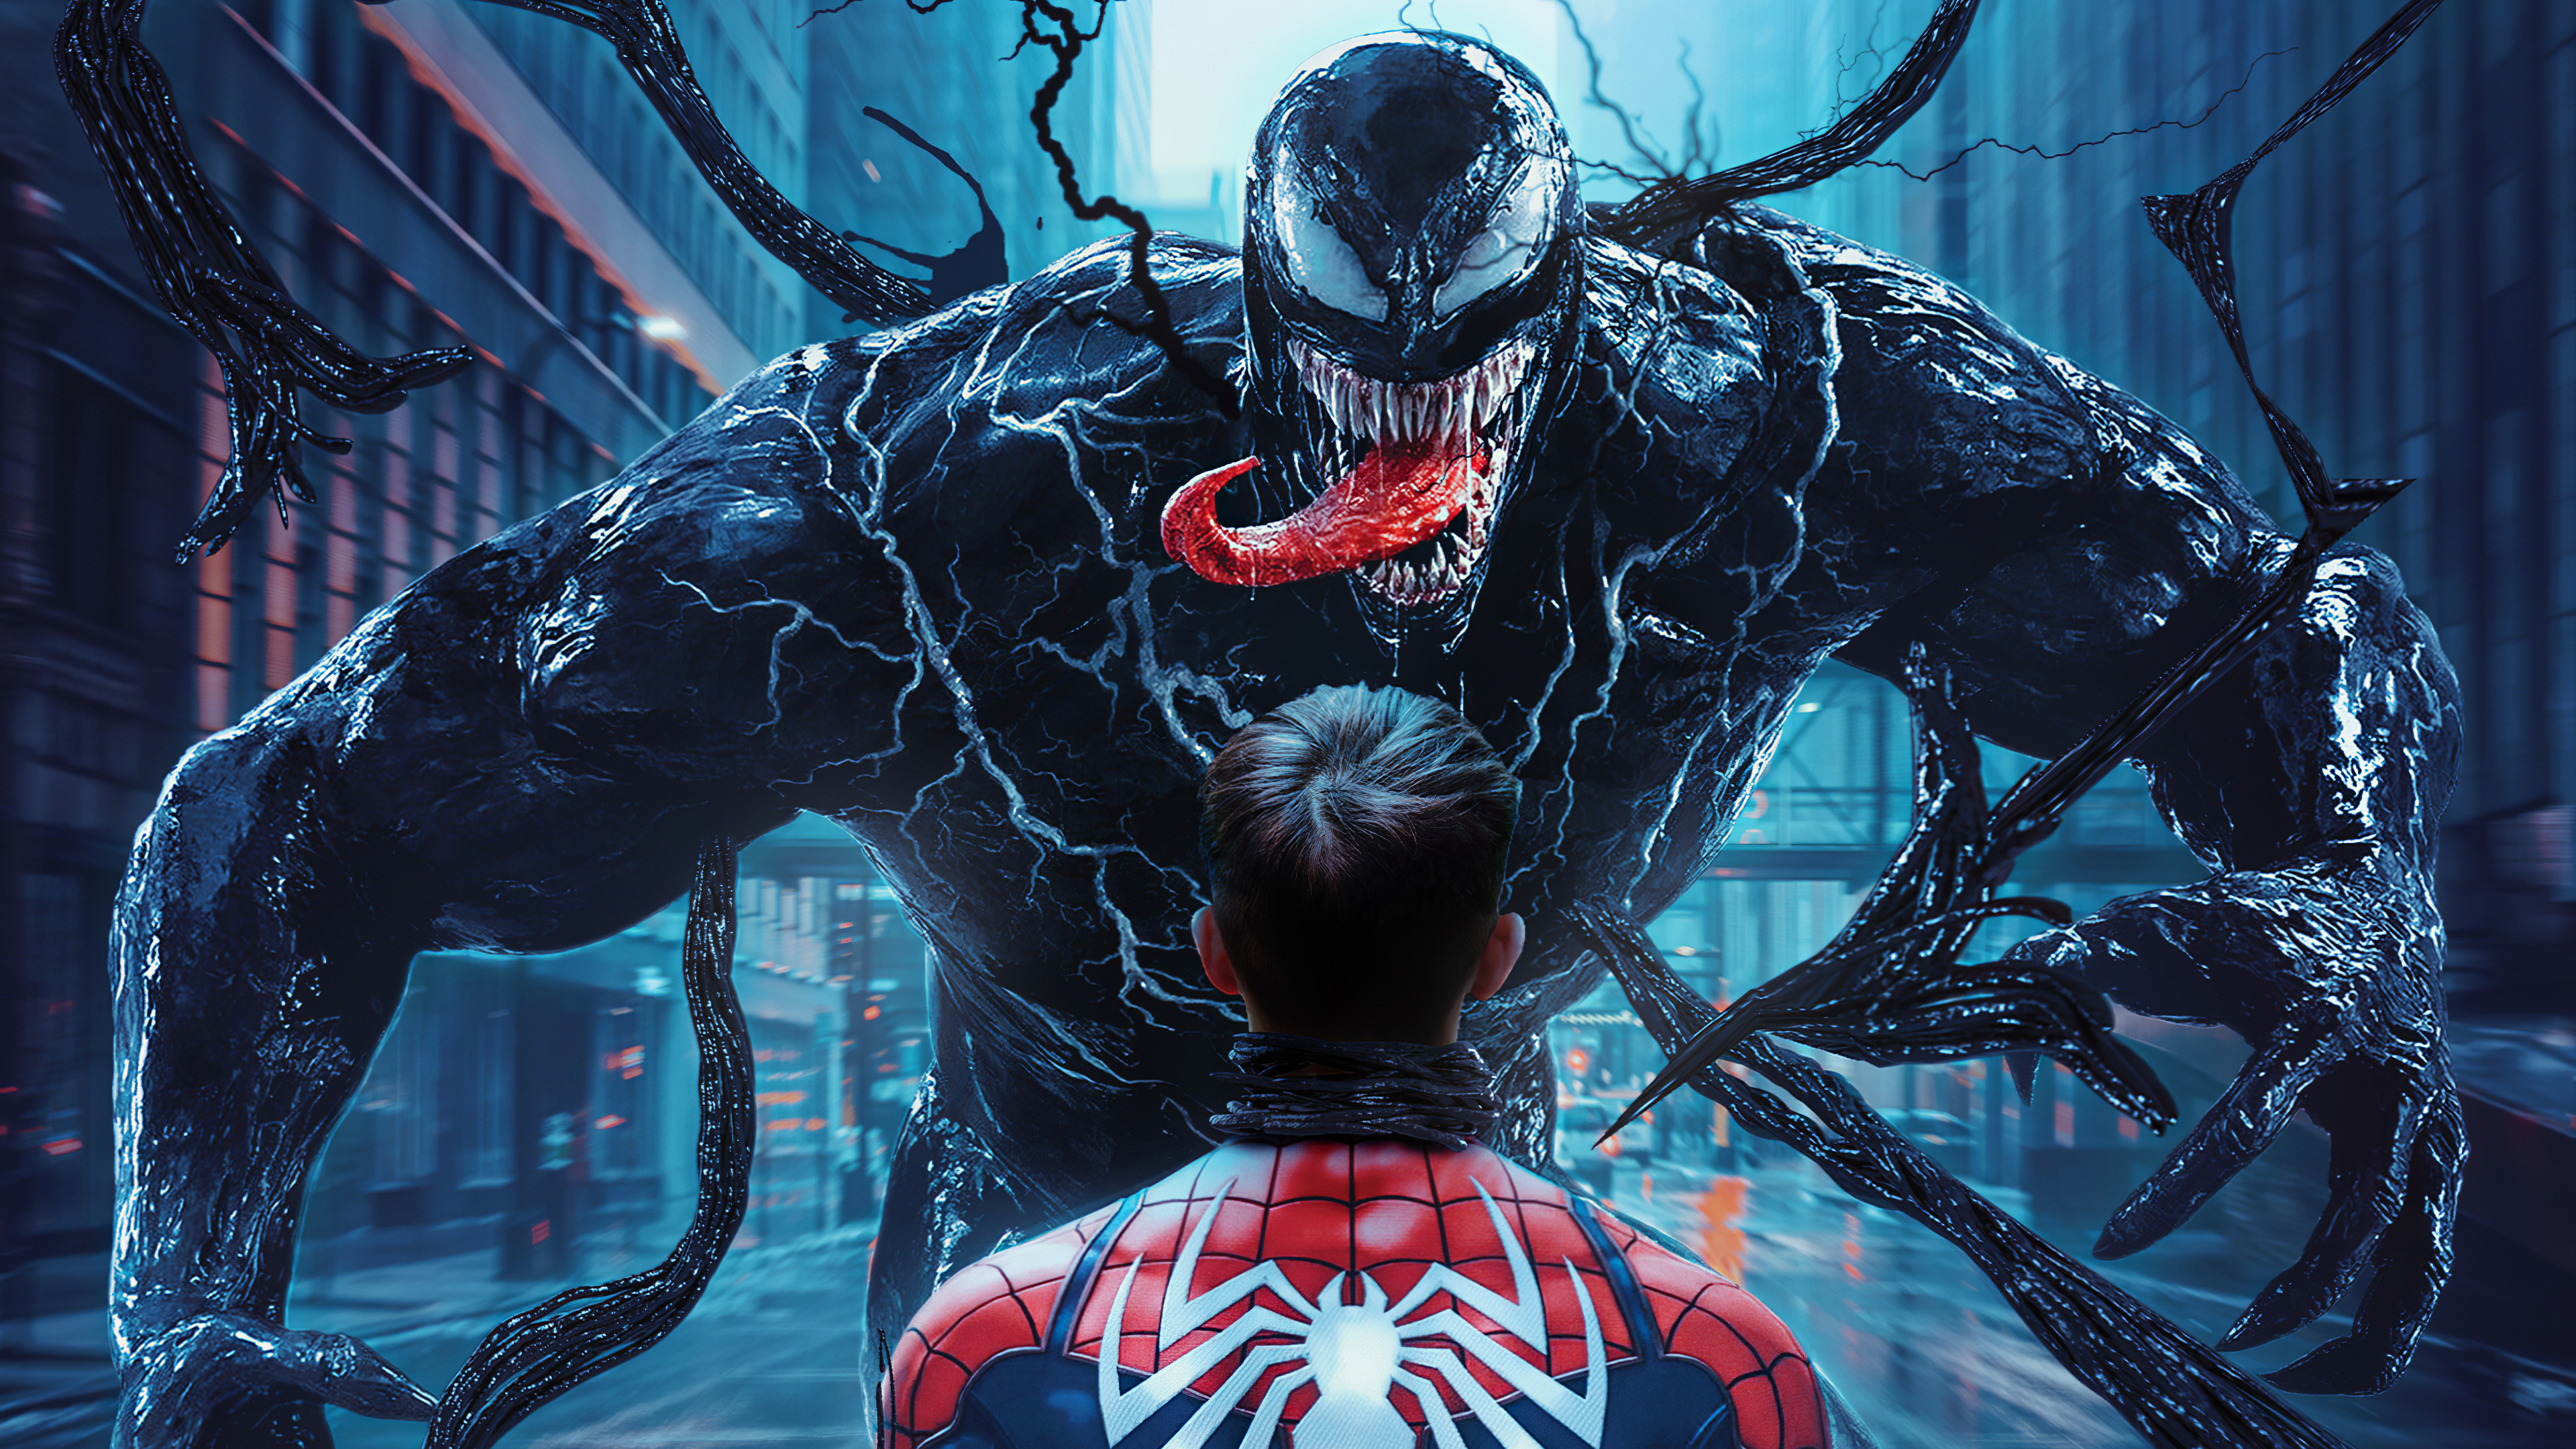 4k Spider Man Vs Venom, HD Superheroes, 4k Wallpapers, Image, Backgrounds, Photos and Pictures